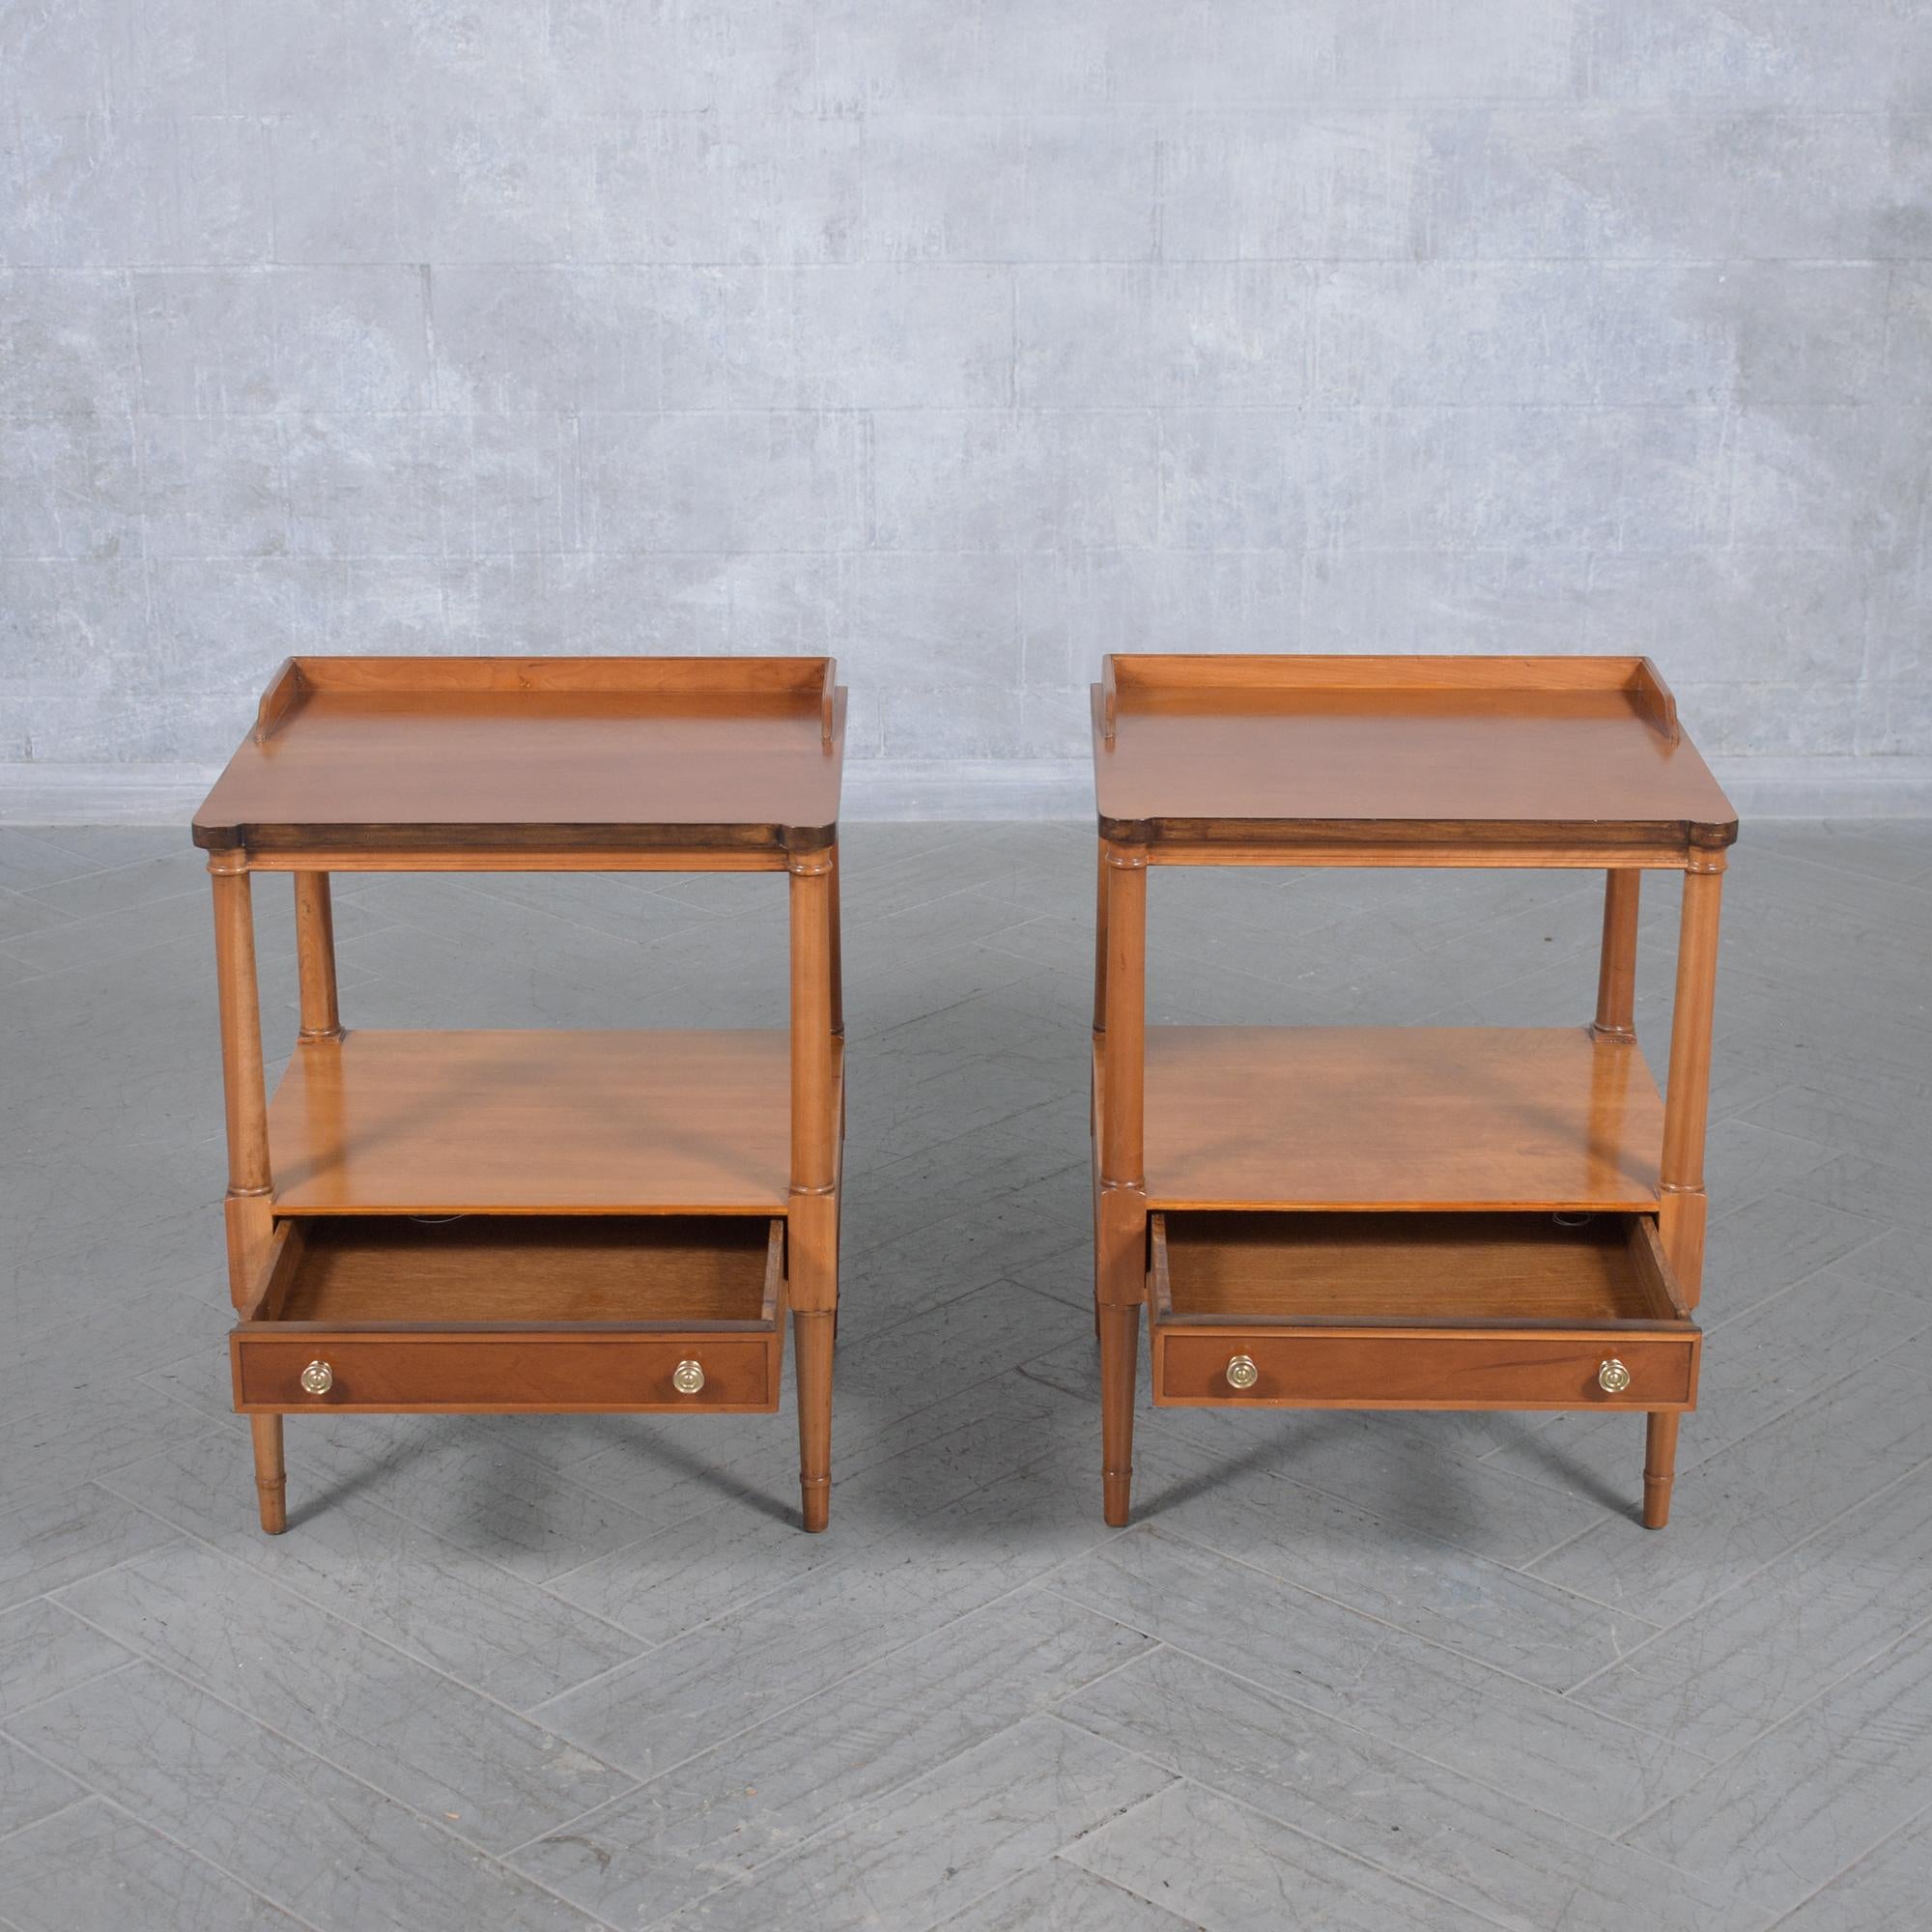 Polished Elegant Handcrafted Maple Bedside Tables with Brass Handles and Tapered Legs For Sale